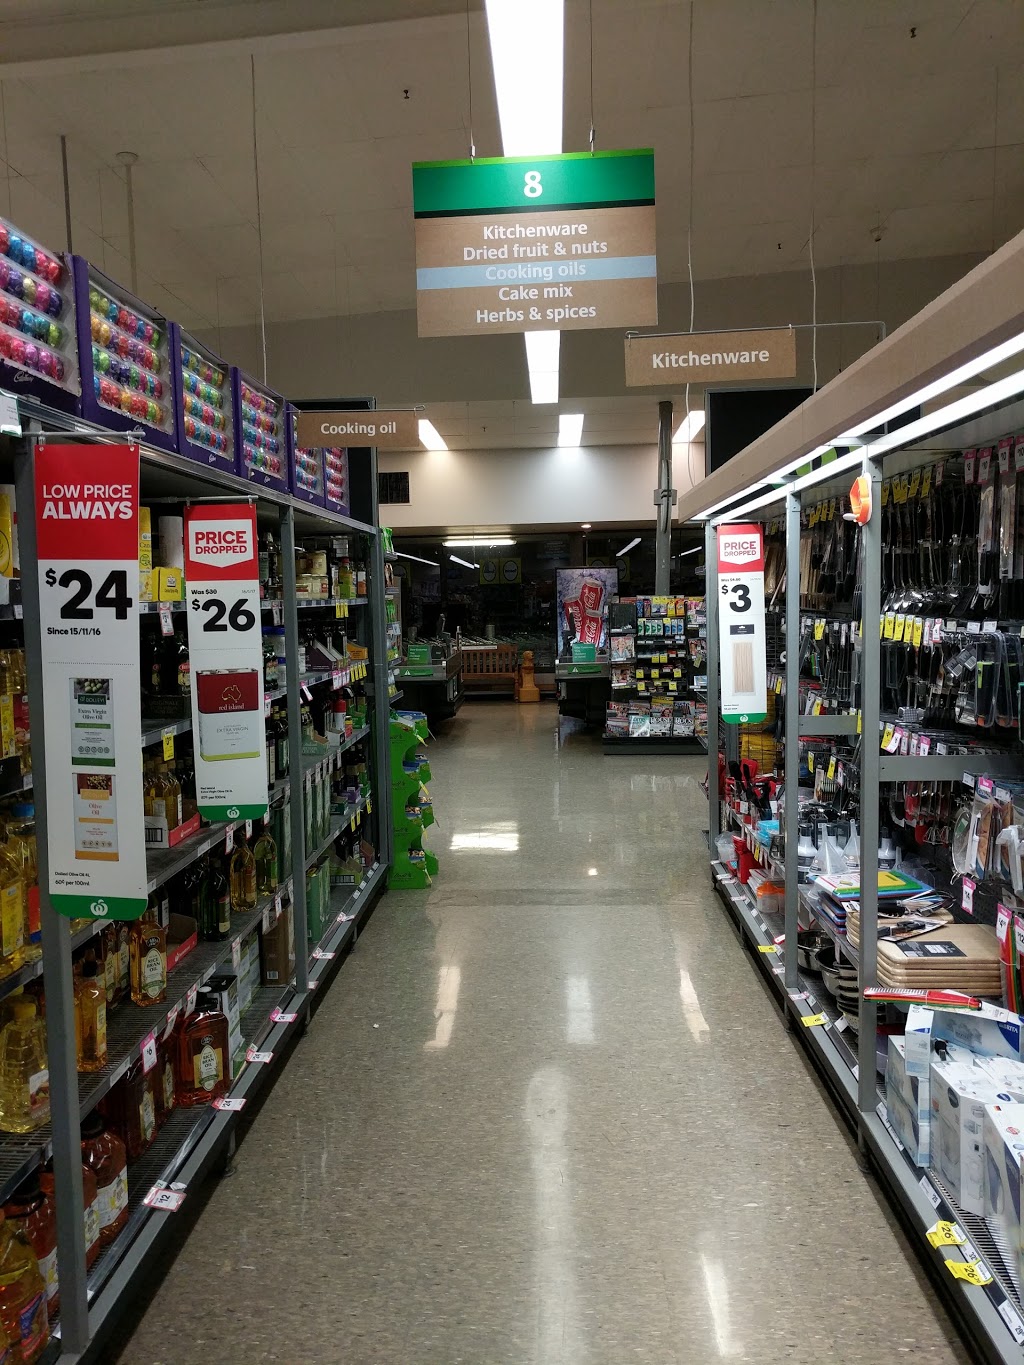 Woolworths Young | 263 Boorowa St, Young NSW 2594, Australia | Phone: (02) 6381 3102